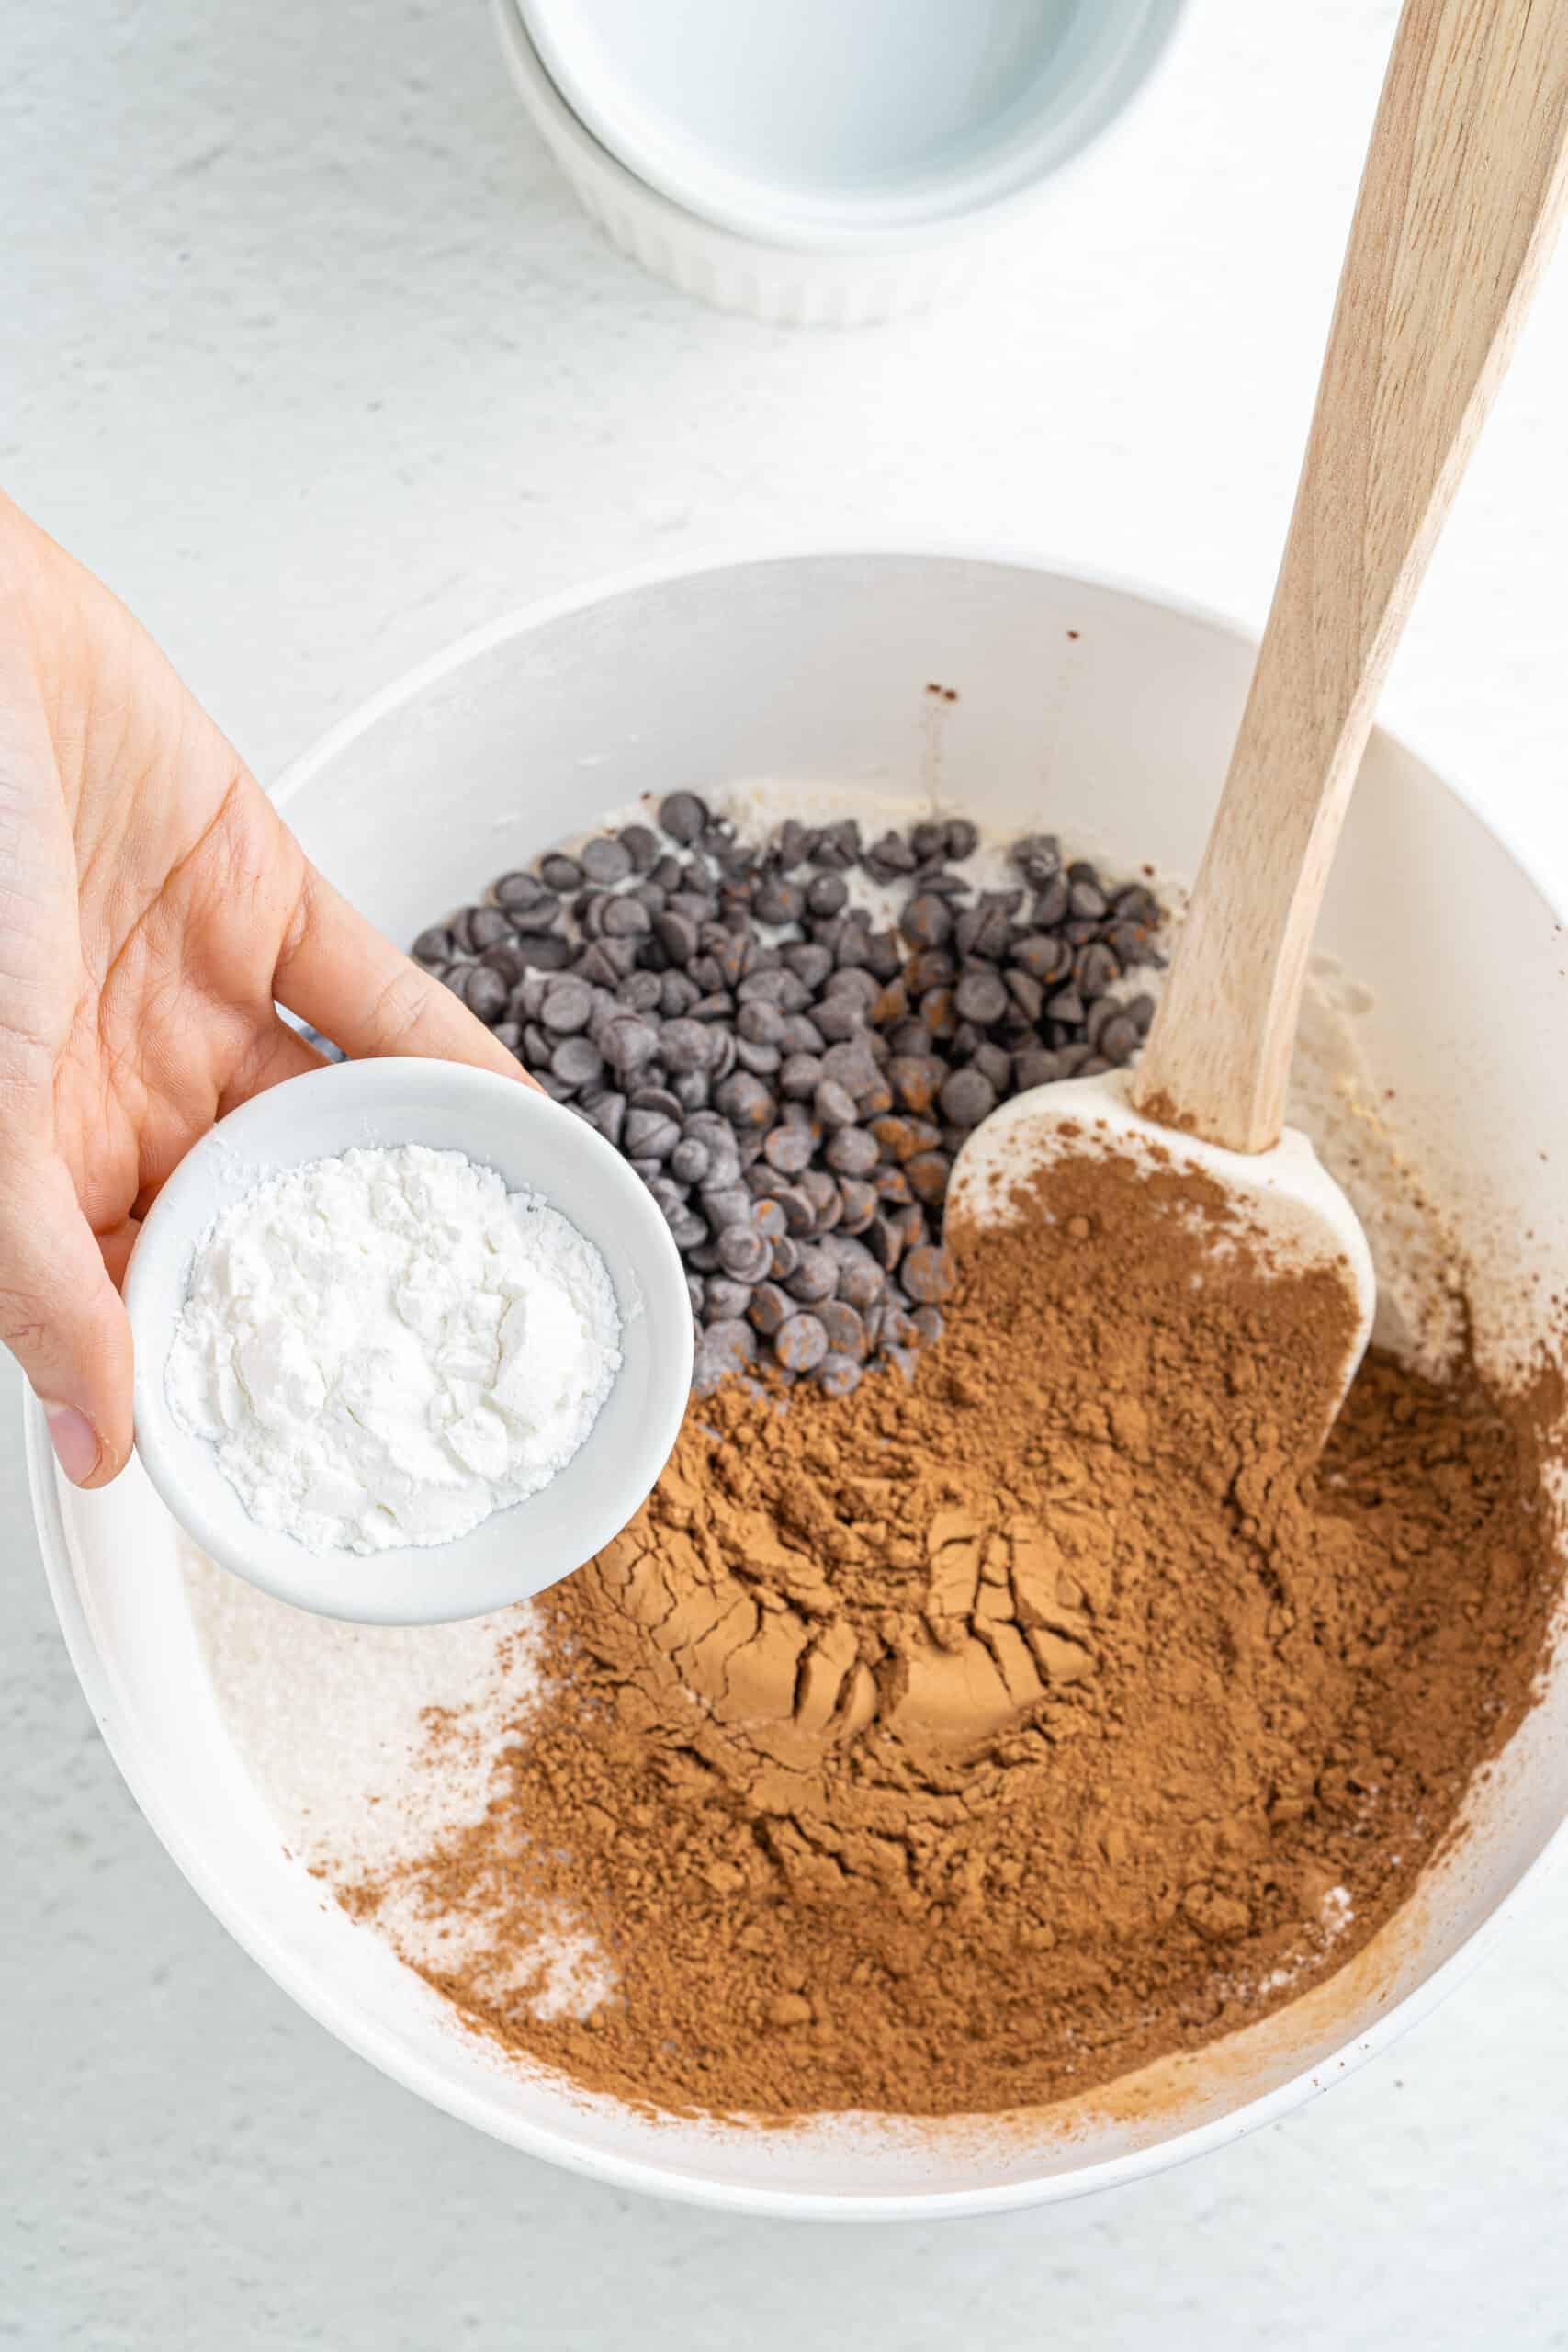 Ingredients to Double chocolate muffins
